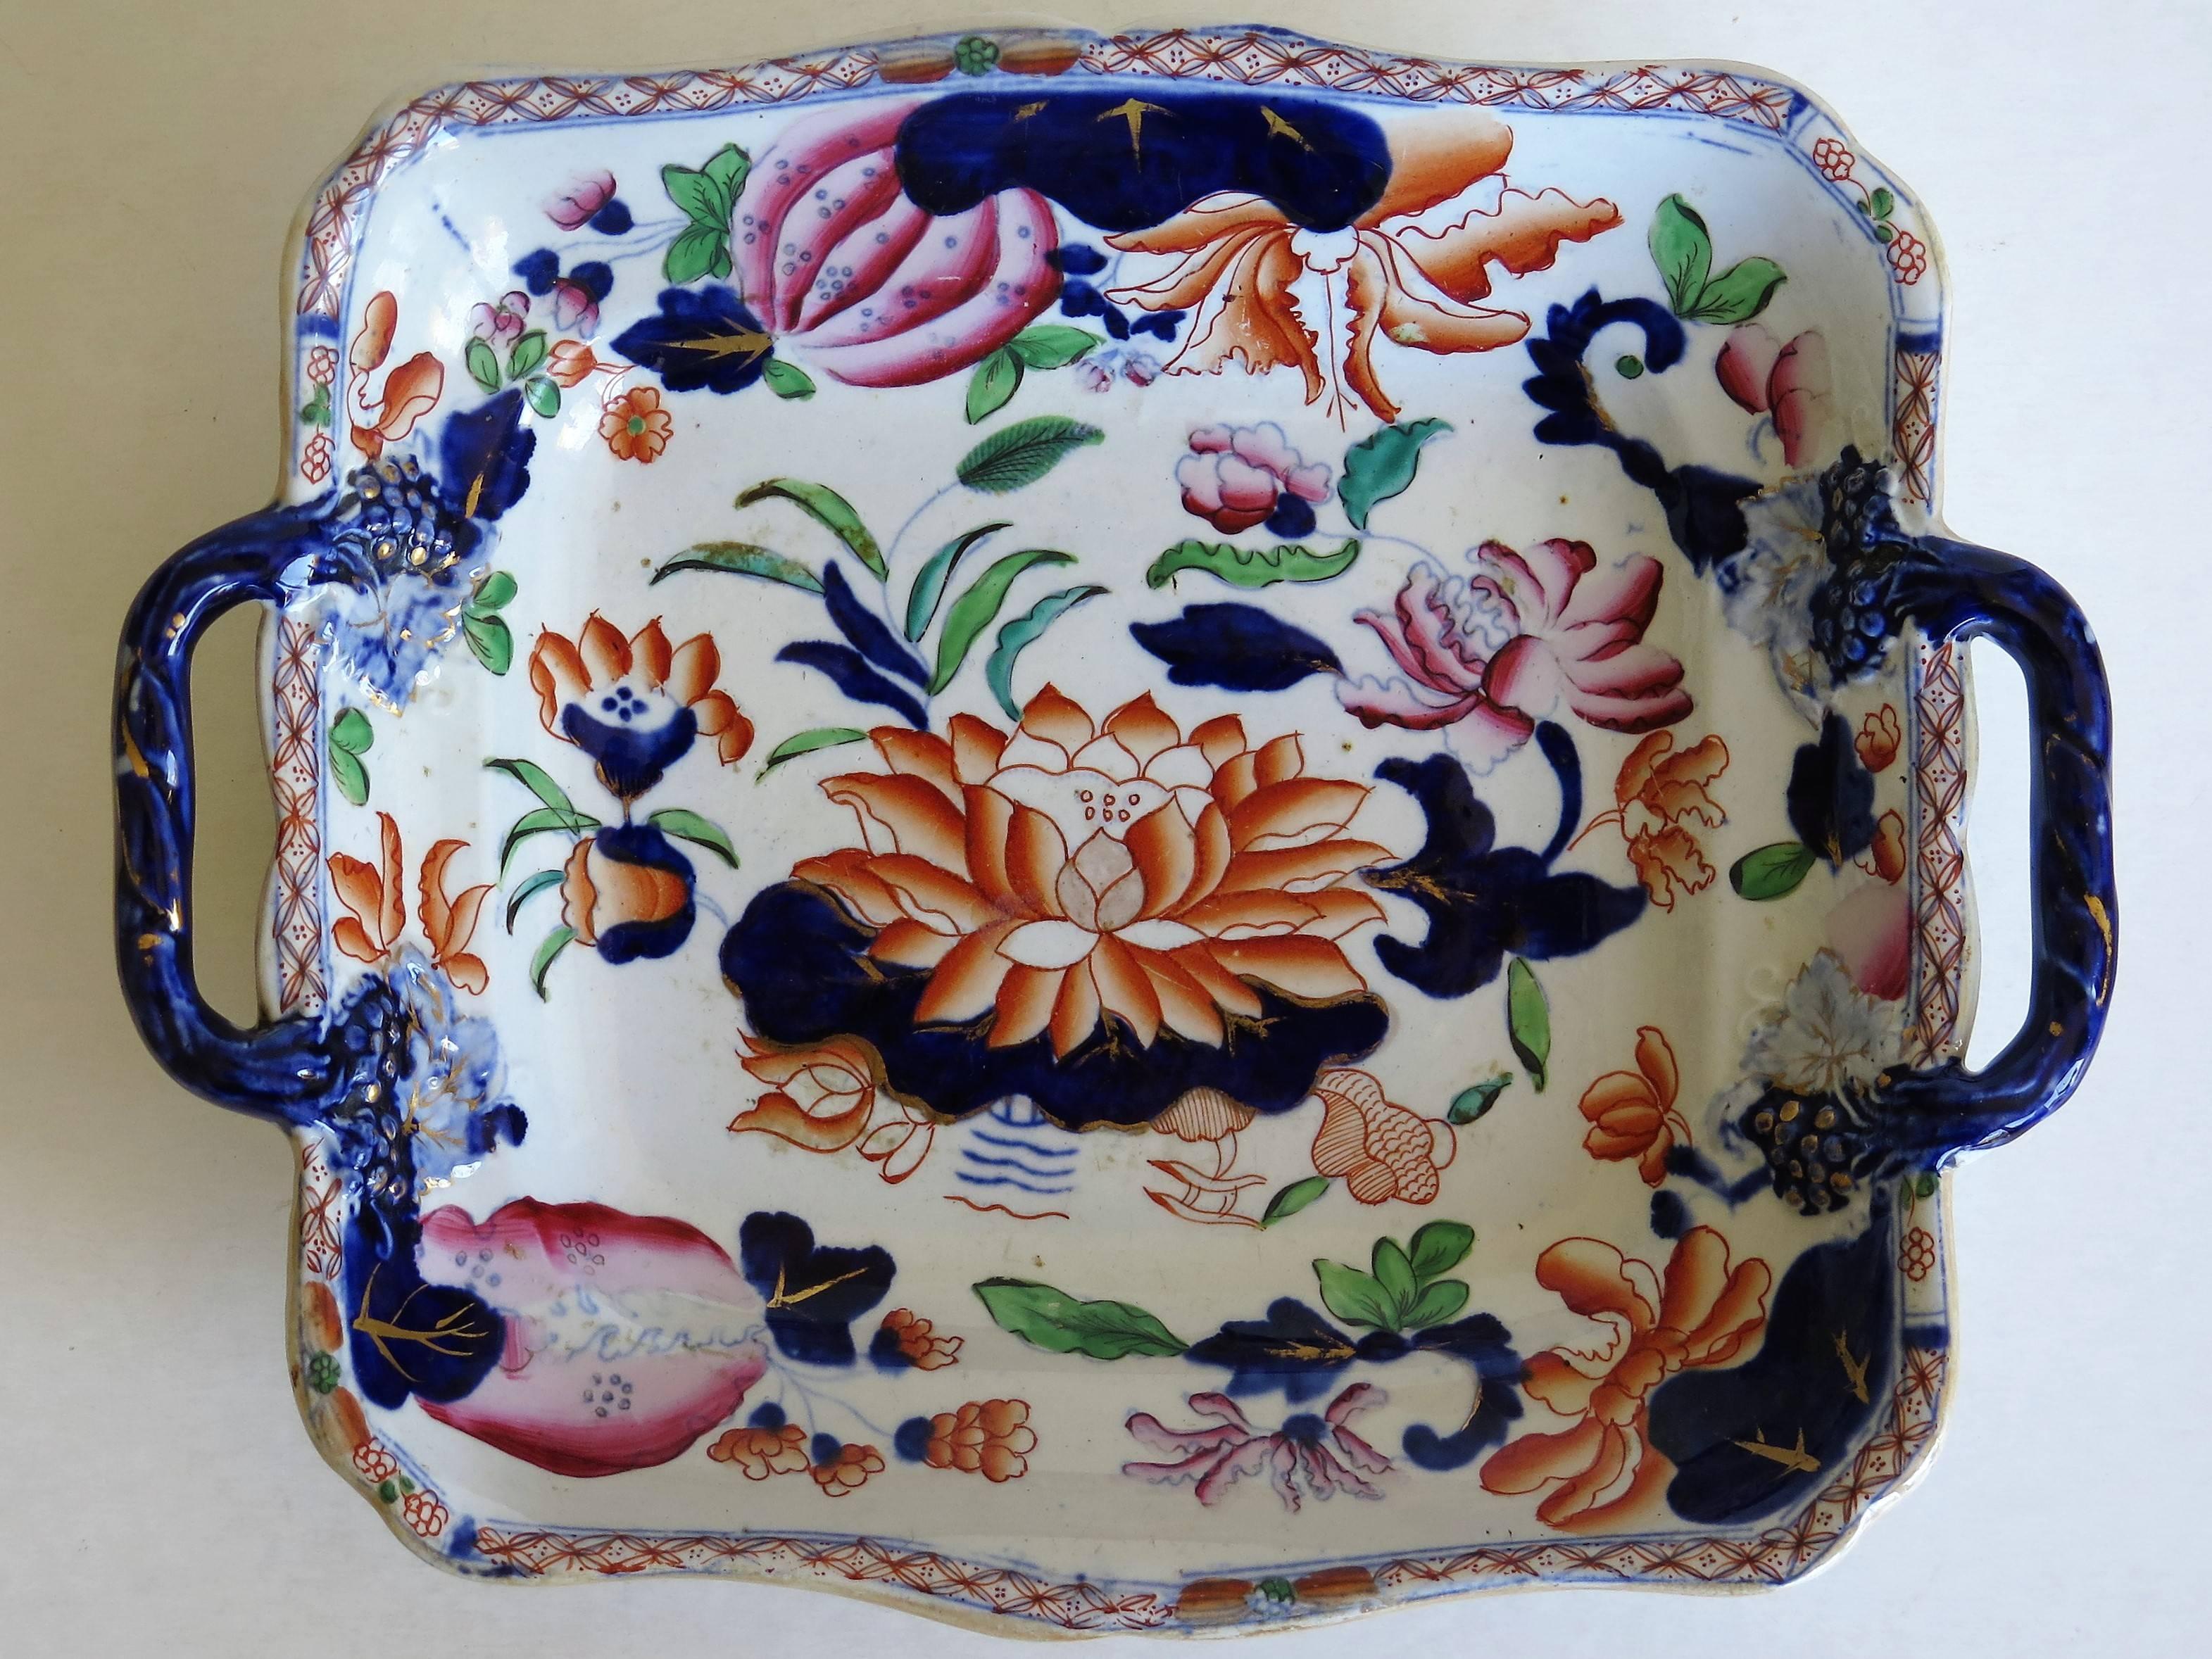 This is a very good two handled desert dish in the Water Lily Pattern, made by Hicks and Meigh of Shelton, Staffordshire, England between 1806 and 1822, probably, circa 1815.

This is a beautiful dish which is nominally square (without the